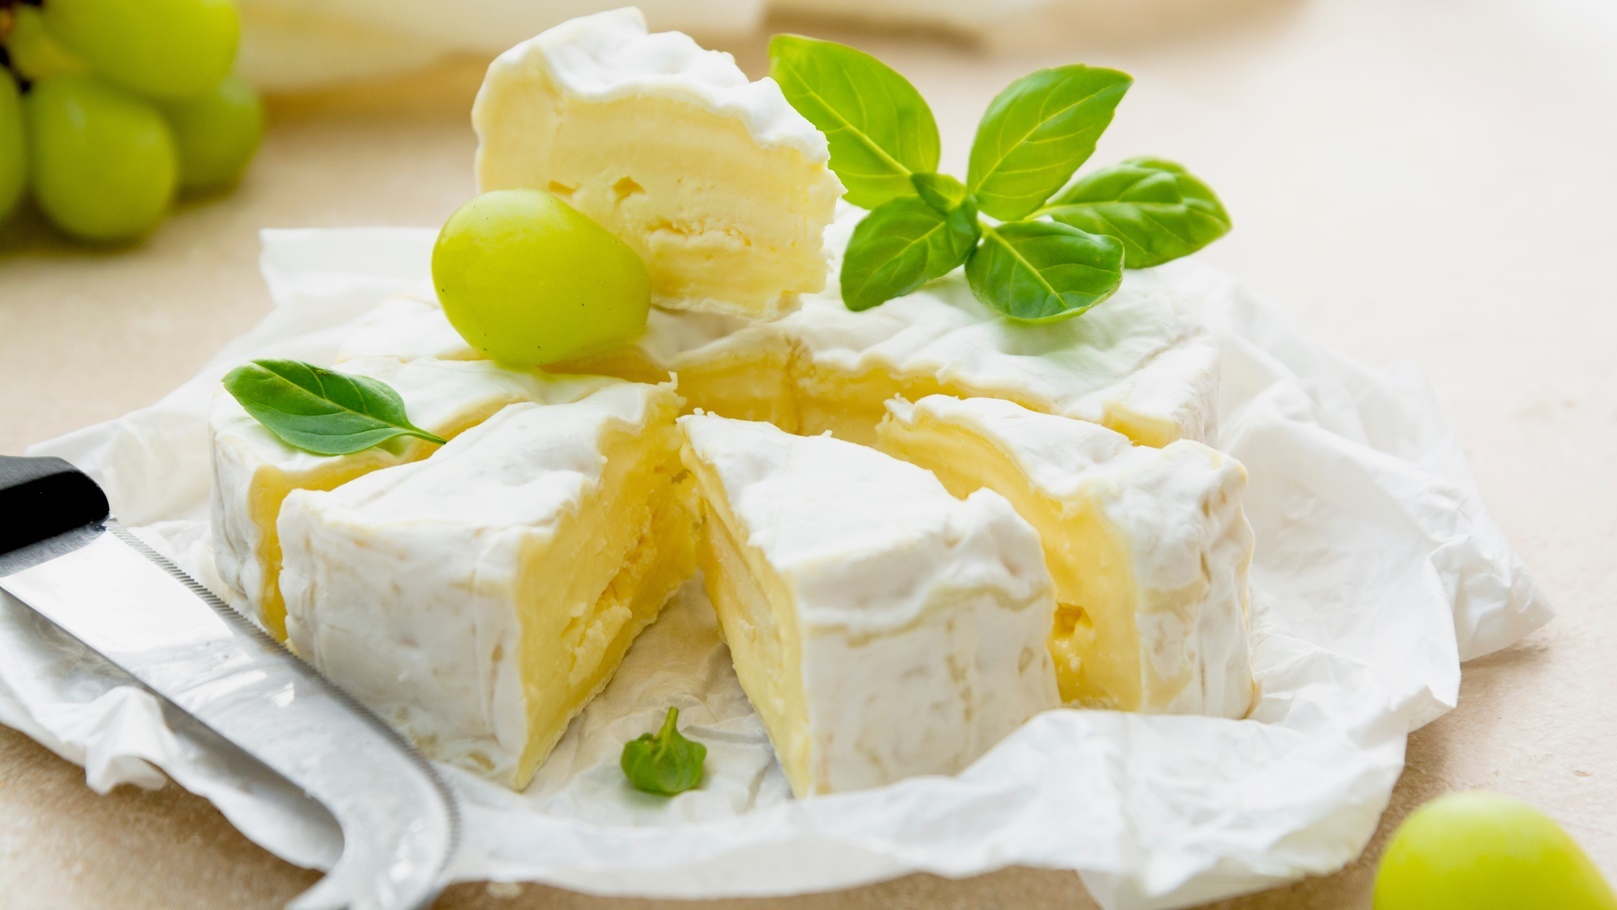 camembert-cheese-with-basil-leaves-dairy-products-2021-09-04-00-08-05-utc